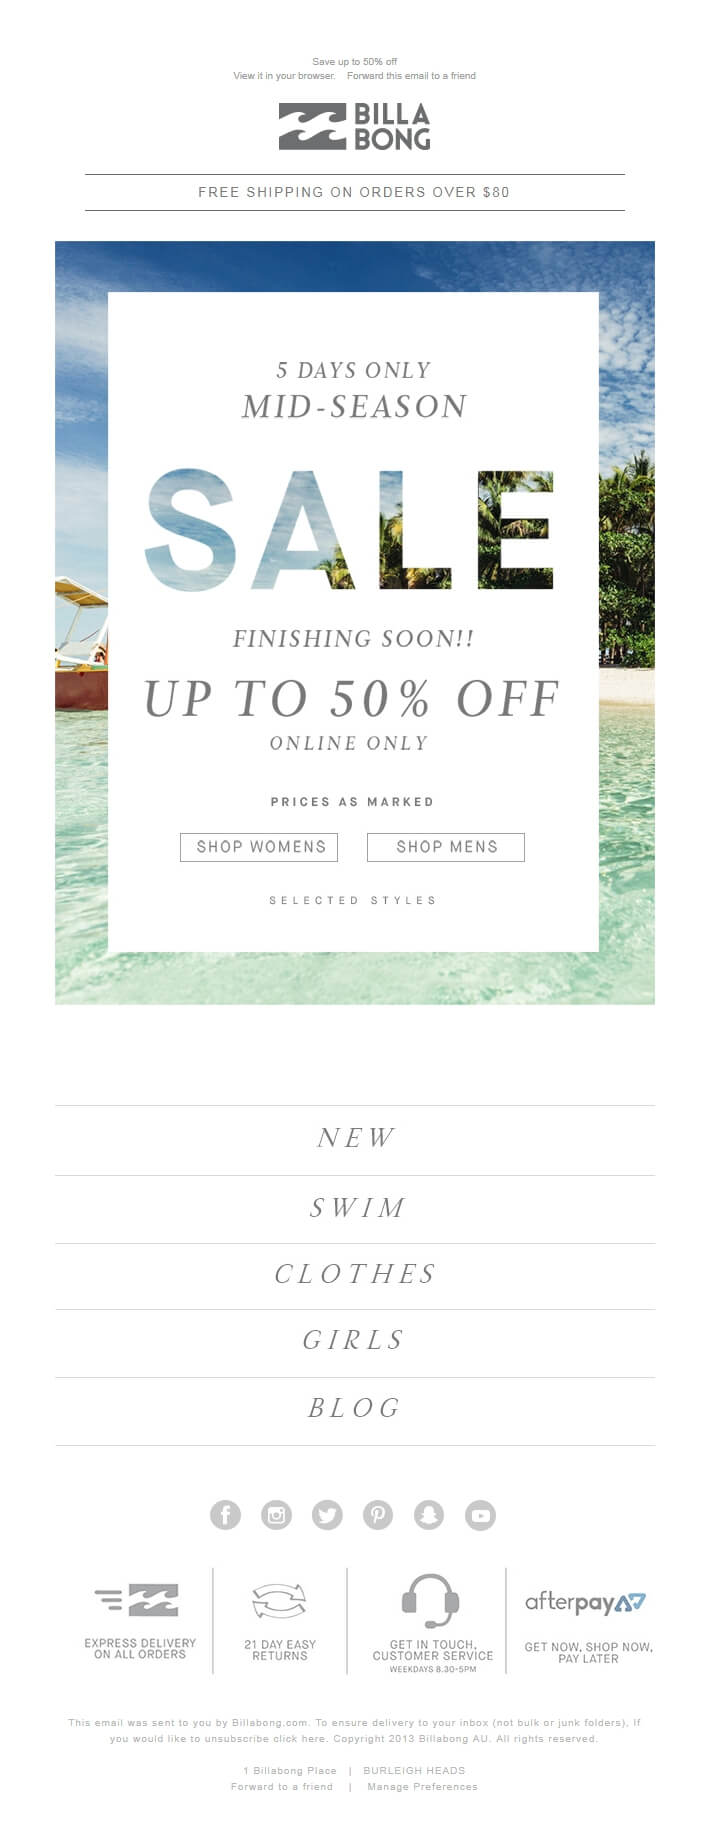 A marketing email by Billabong that shows content for thier female subscribers